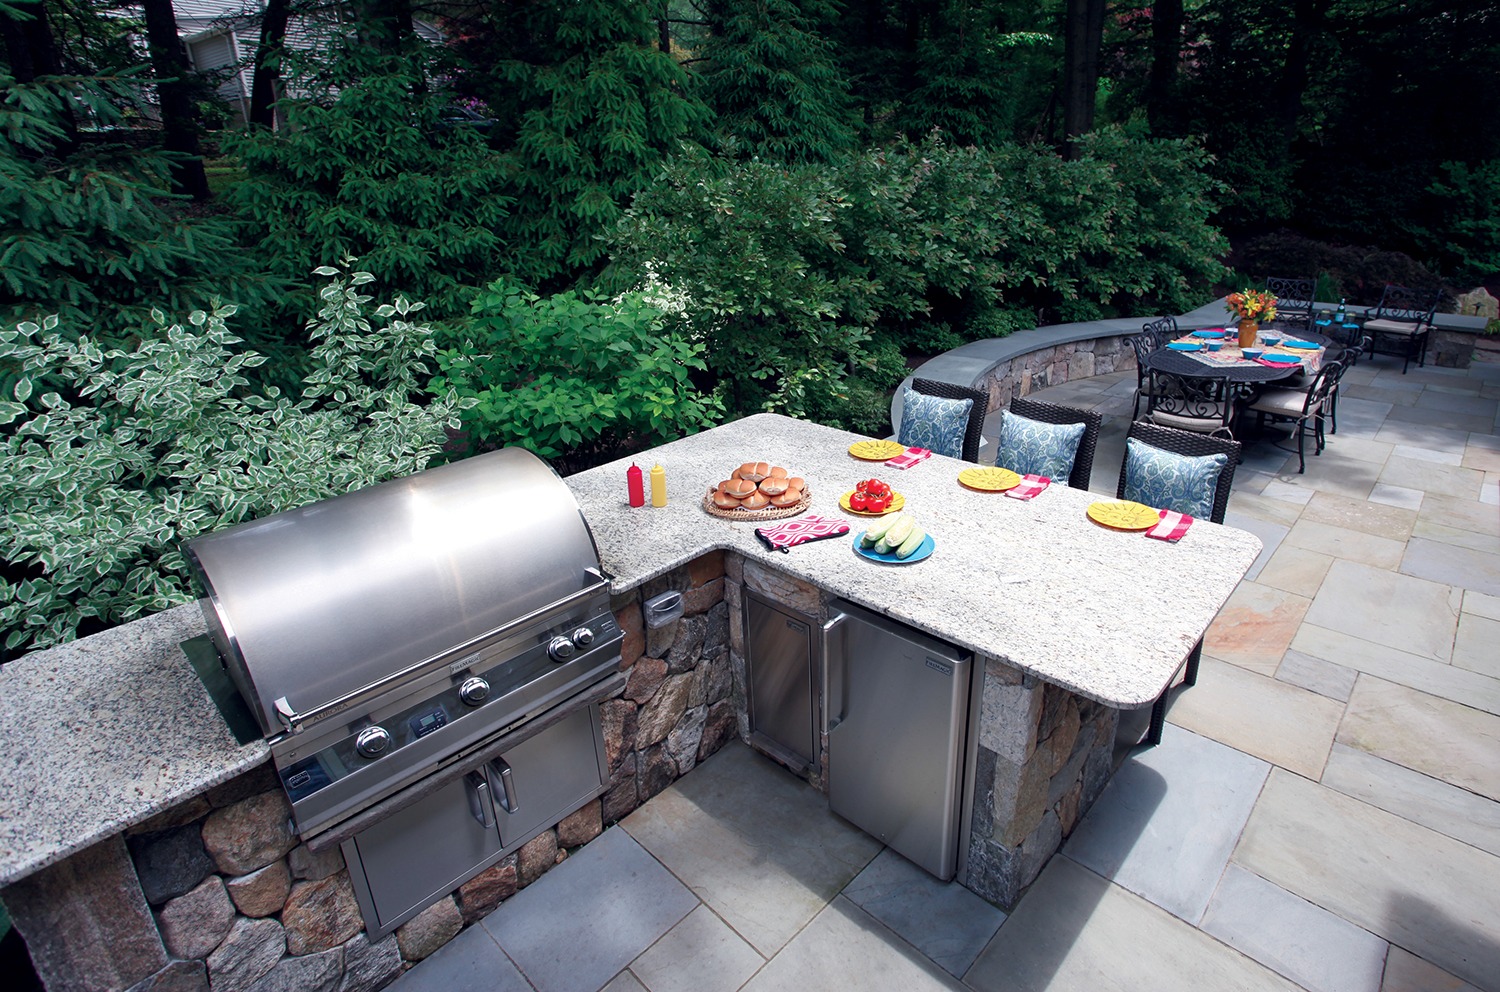 Outdoor kitchen with a built-in grill, stone countertops, and stainless-steel appliances. The dining area has a table set for a meal amid greenery.